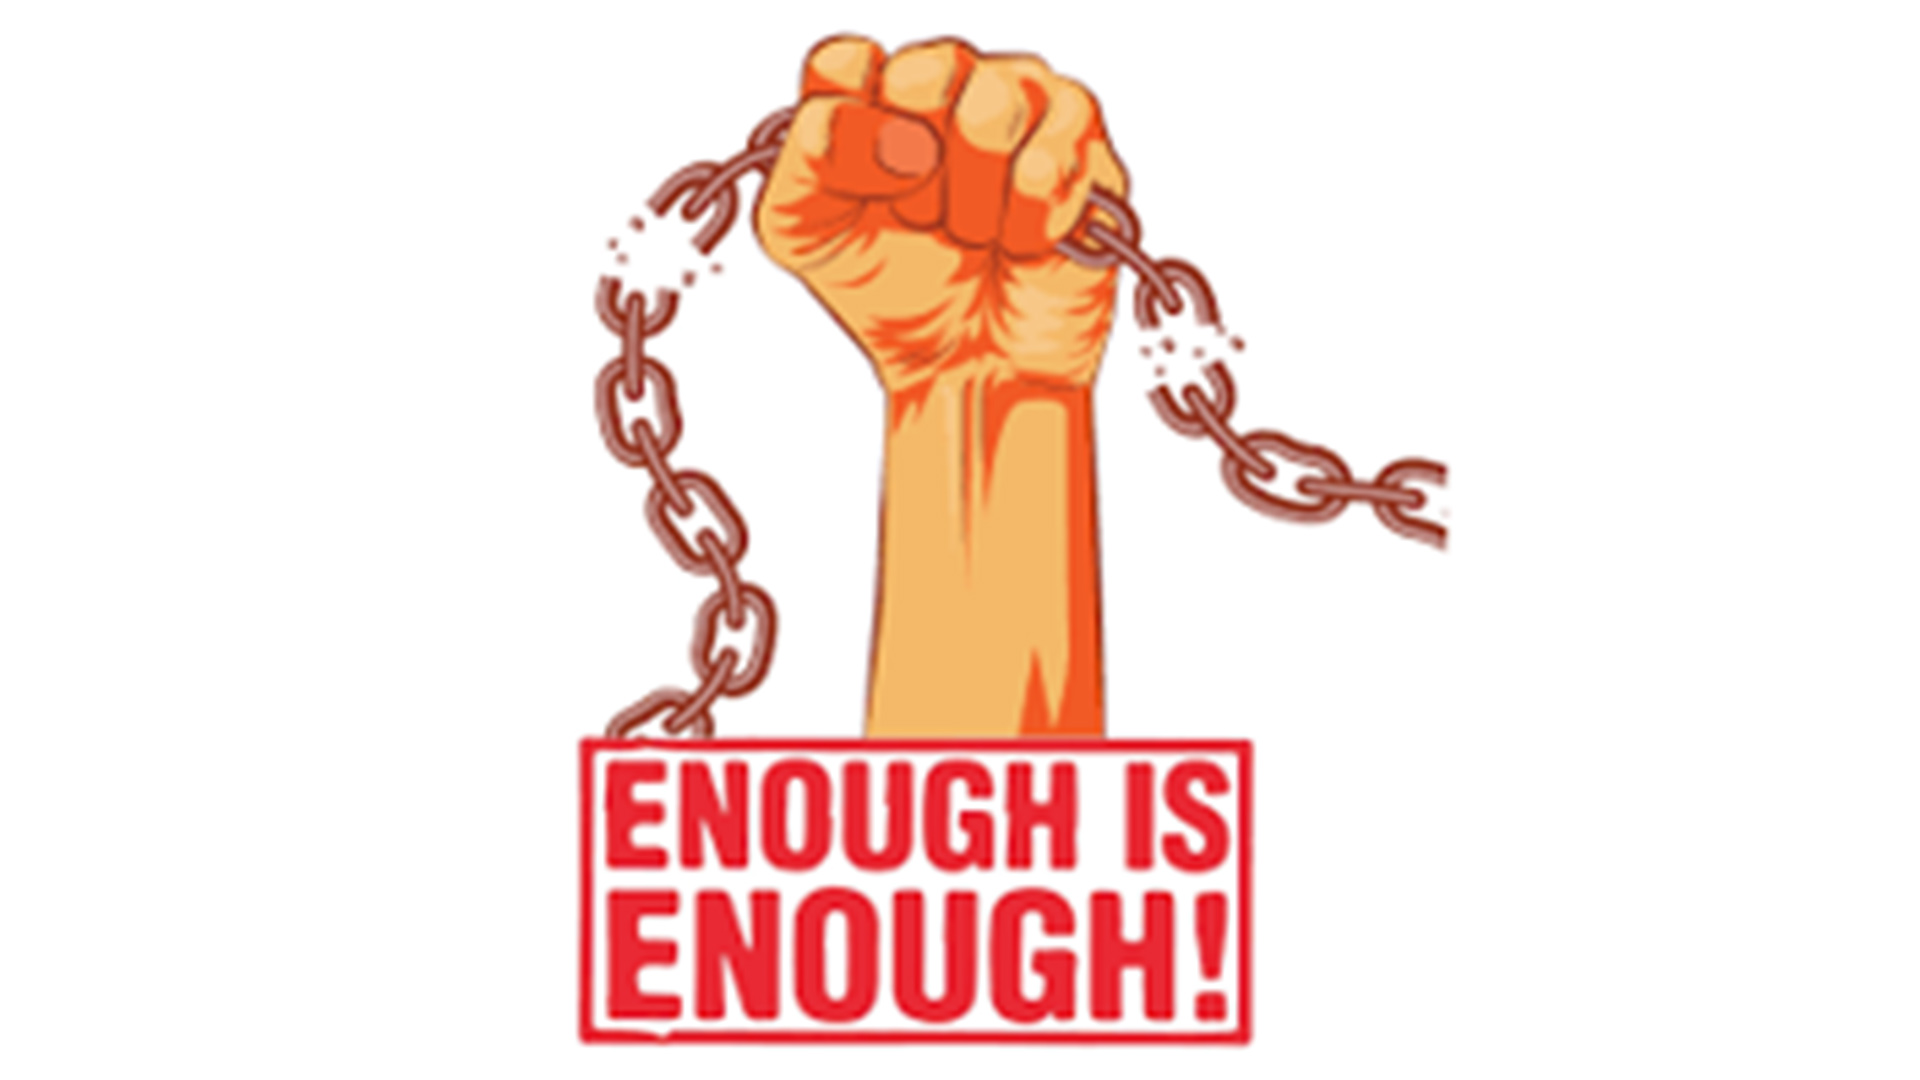 Five Members of the ‘Enough is Enough’ Campaign Arrested